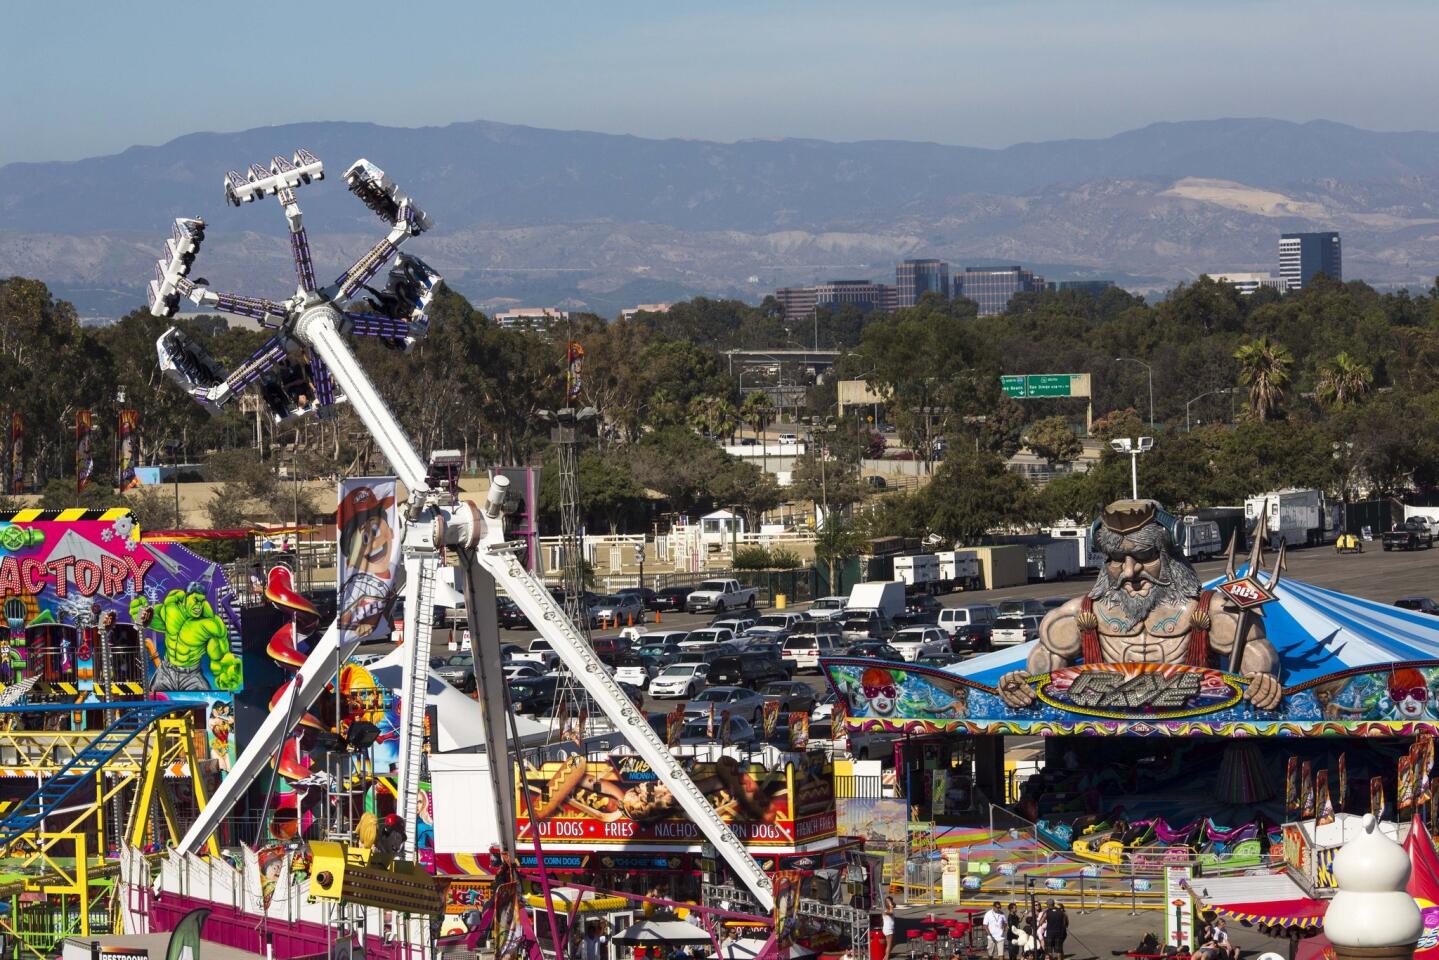 Fairgoers enjoy entertainment, rides, games, animals and deep-fried splendor on Friday, the first day of the Orange County Fair.